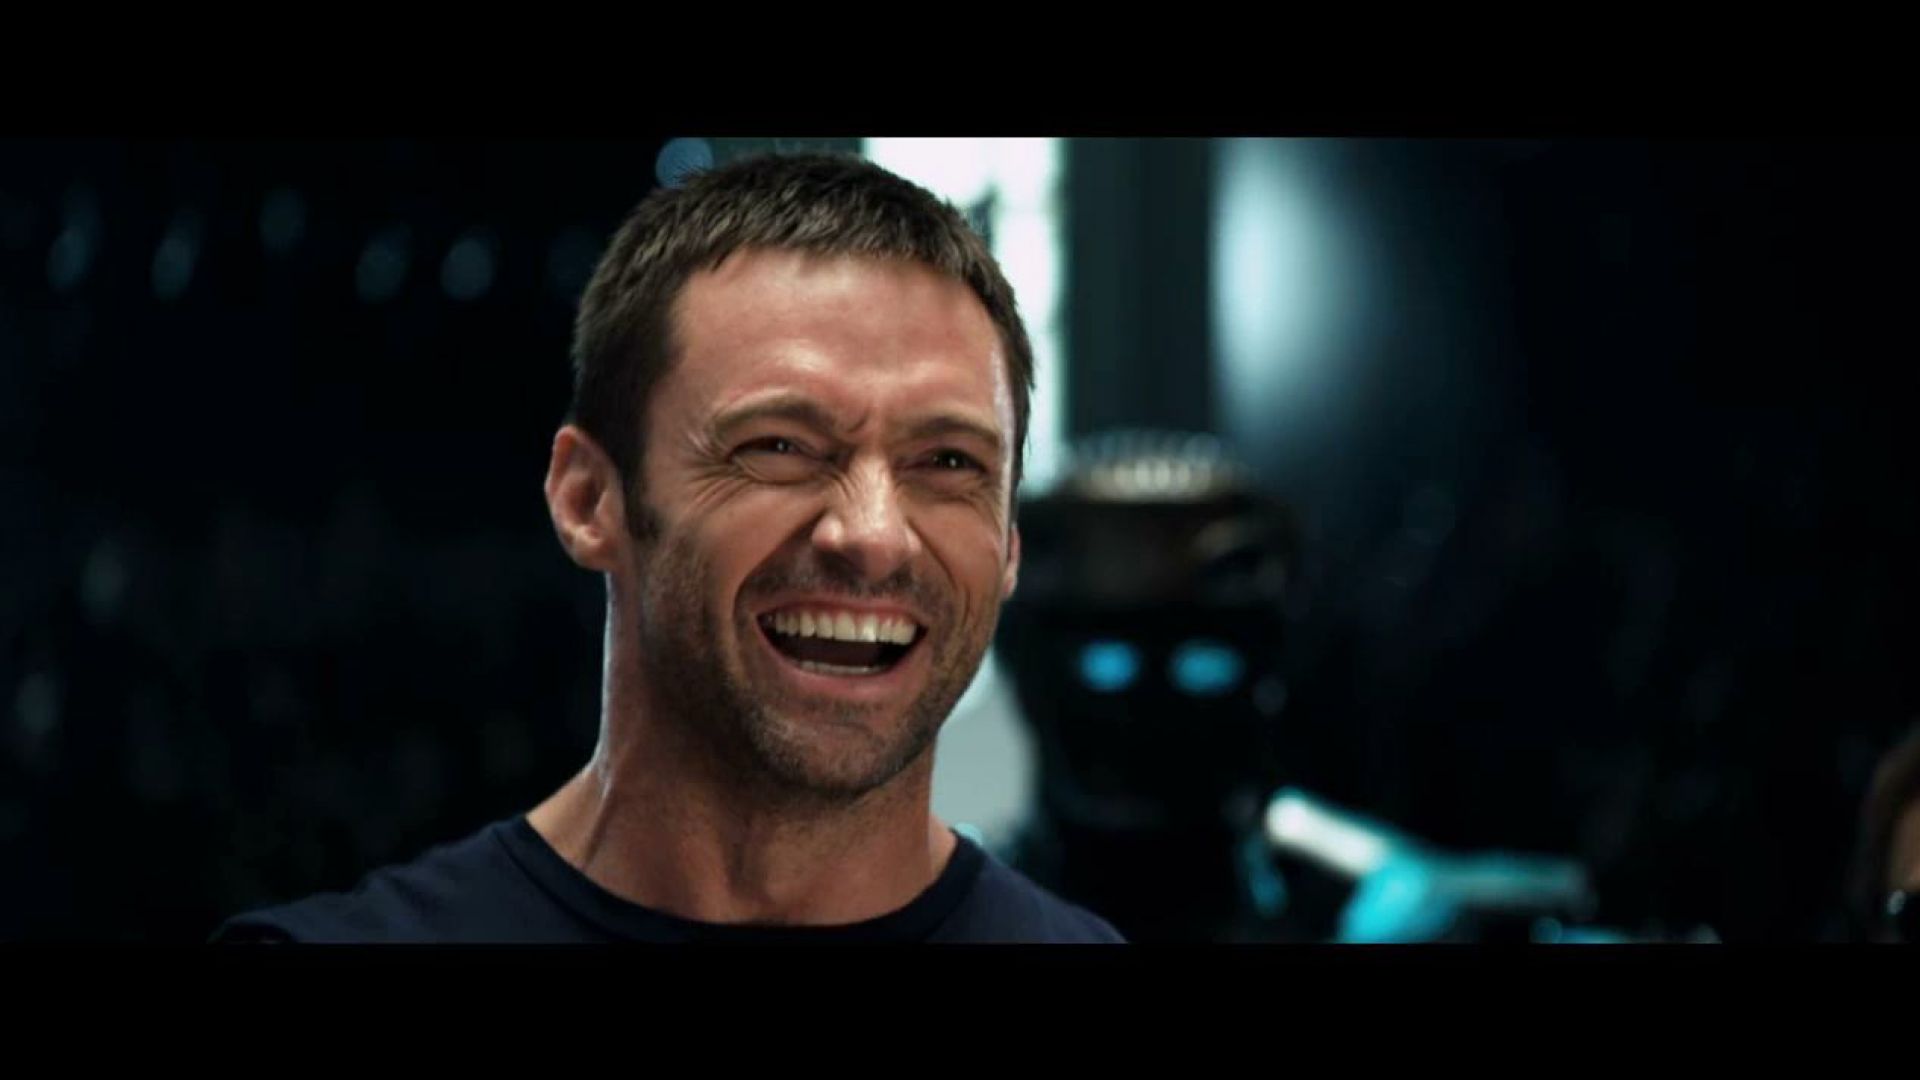 What do you know about robot boxing? Real Steel